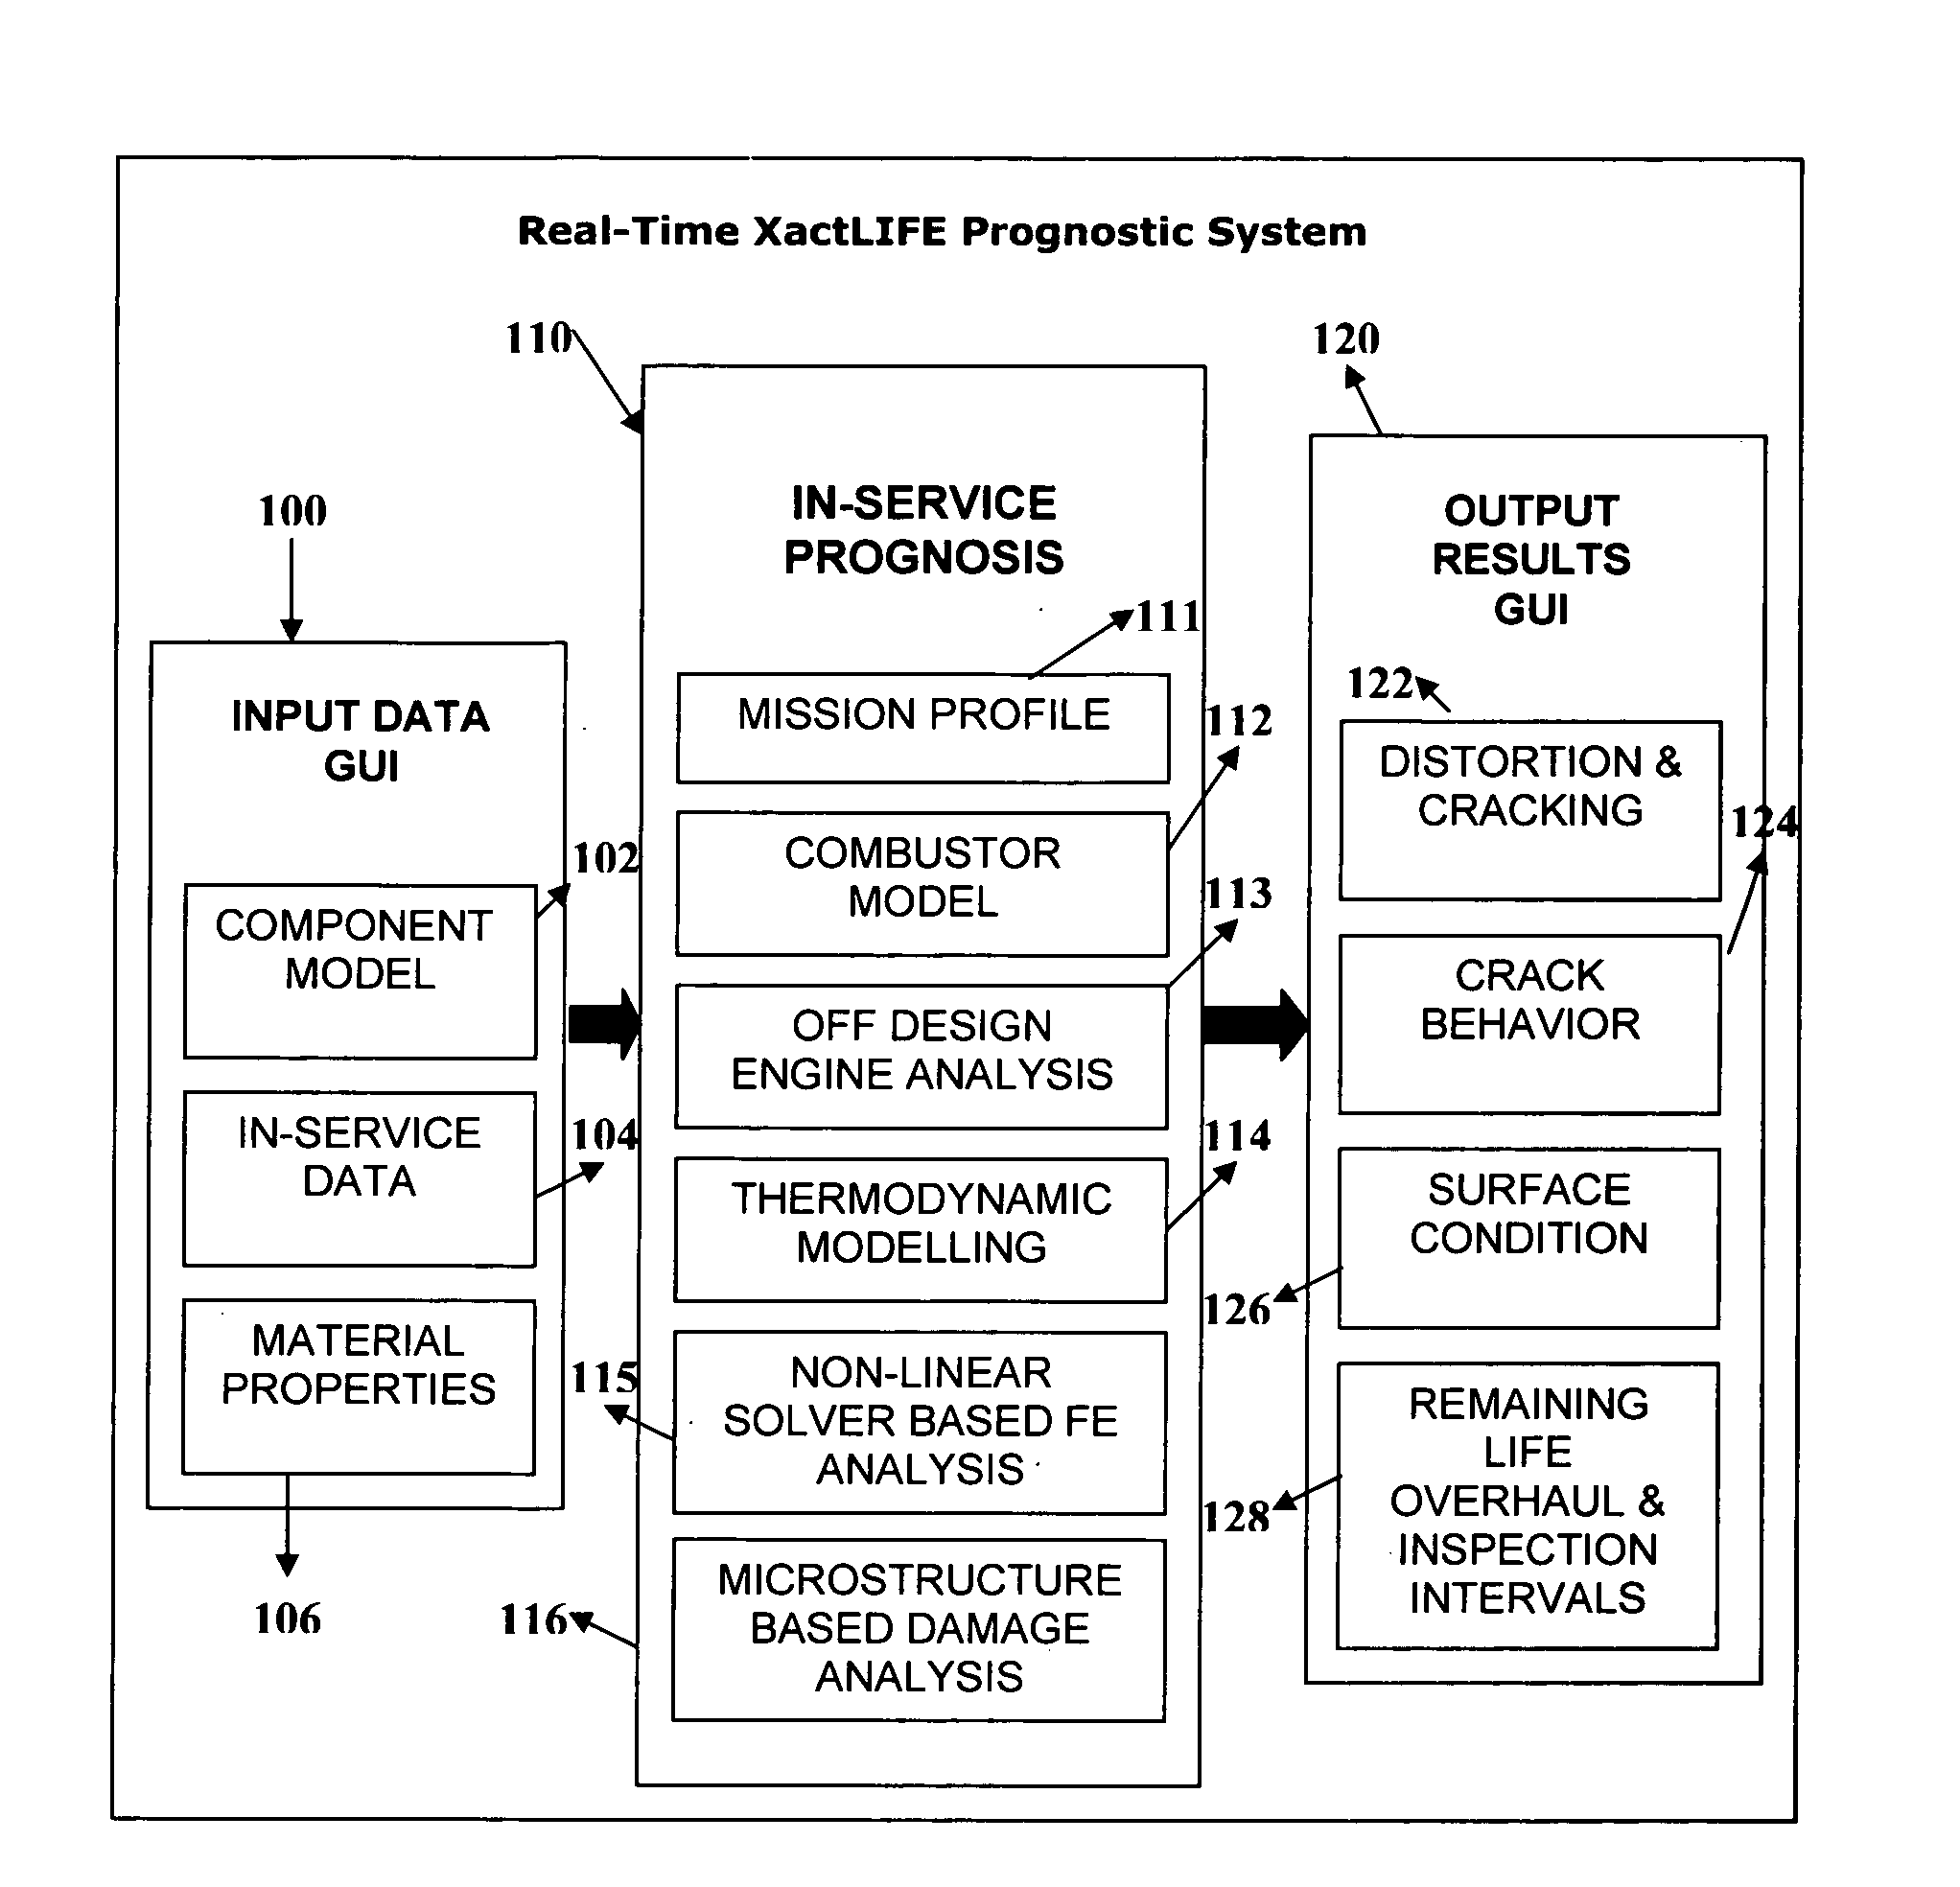 Method and system for real-time prognosis analysis and usage based residual life assessment of turbine engine components and display